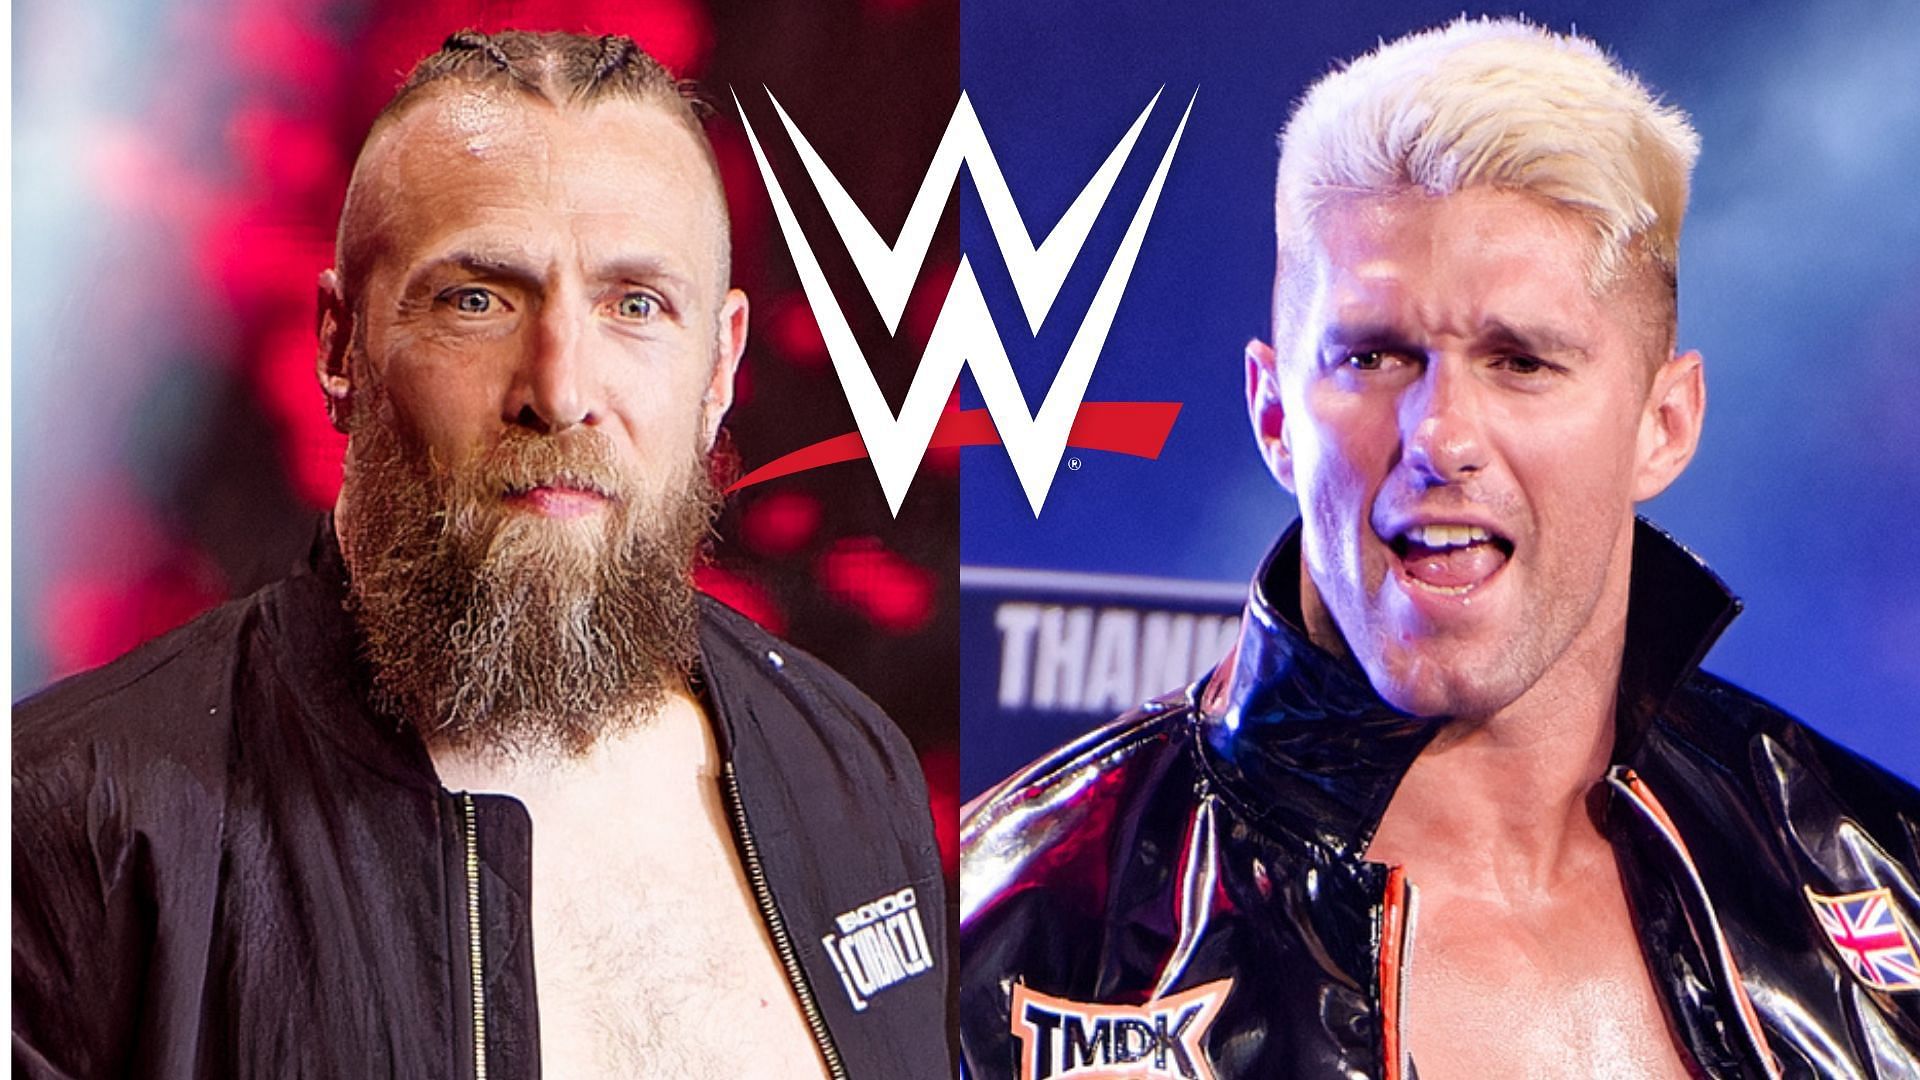 A former WWE Superstar thinks he can beat both Bryan Danielson and Zack Sabre Jr.